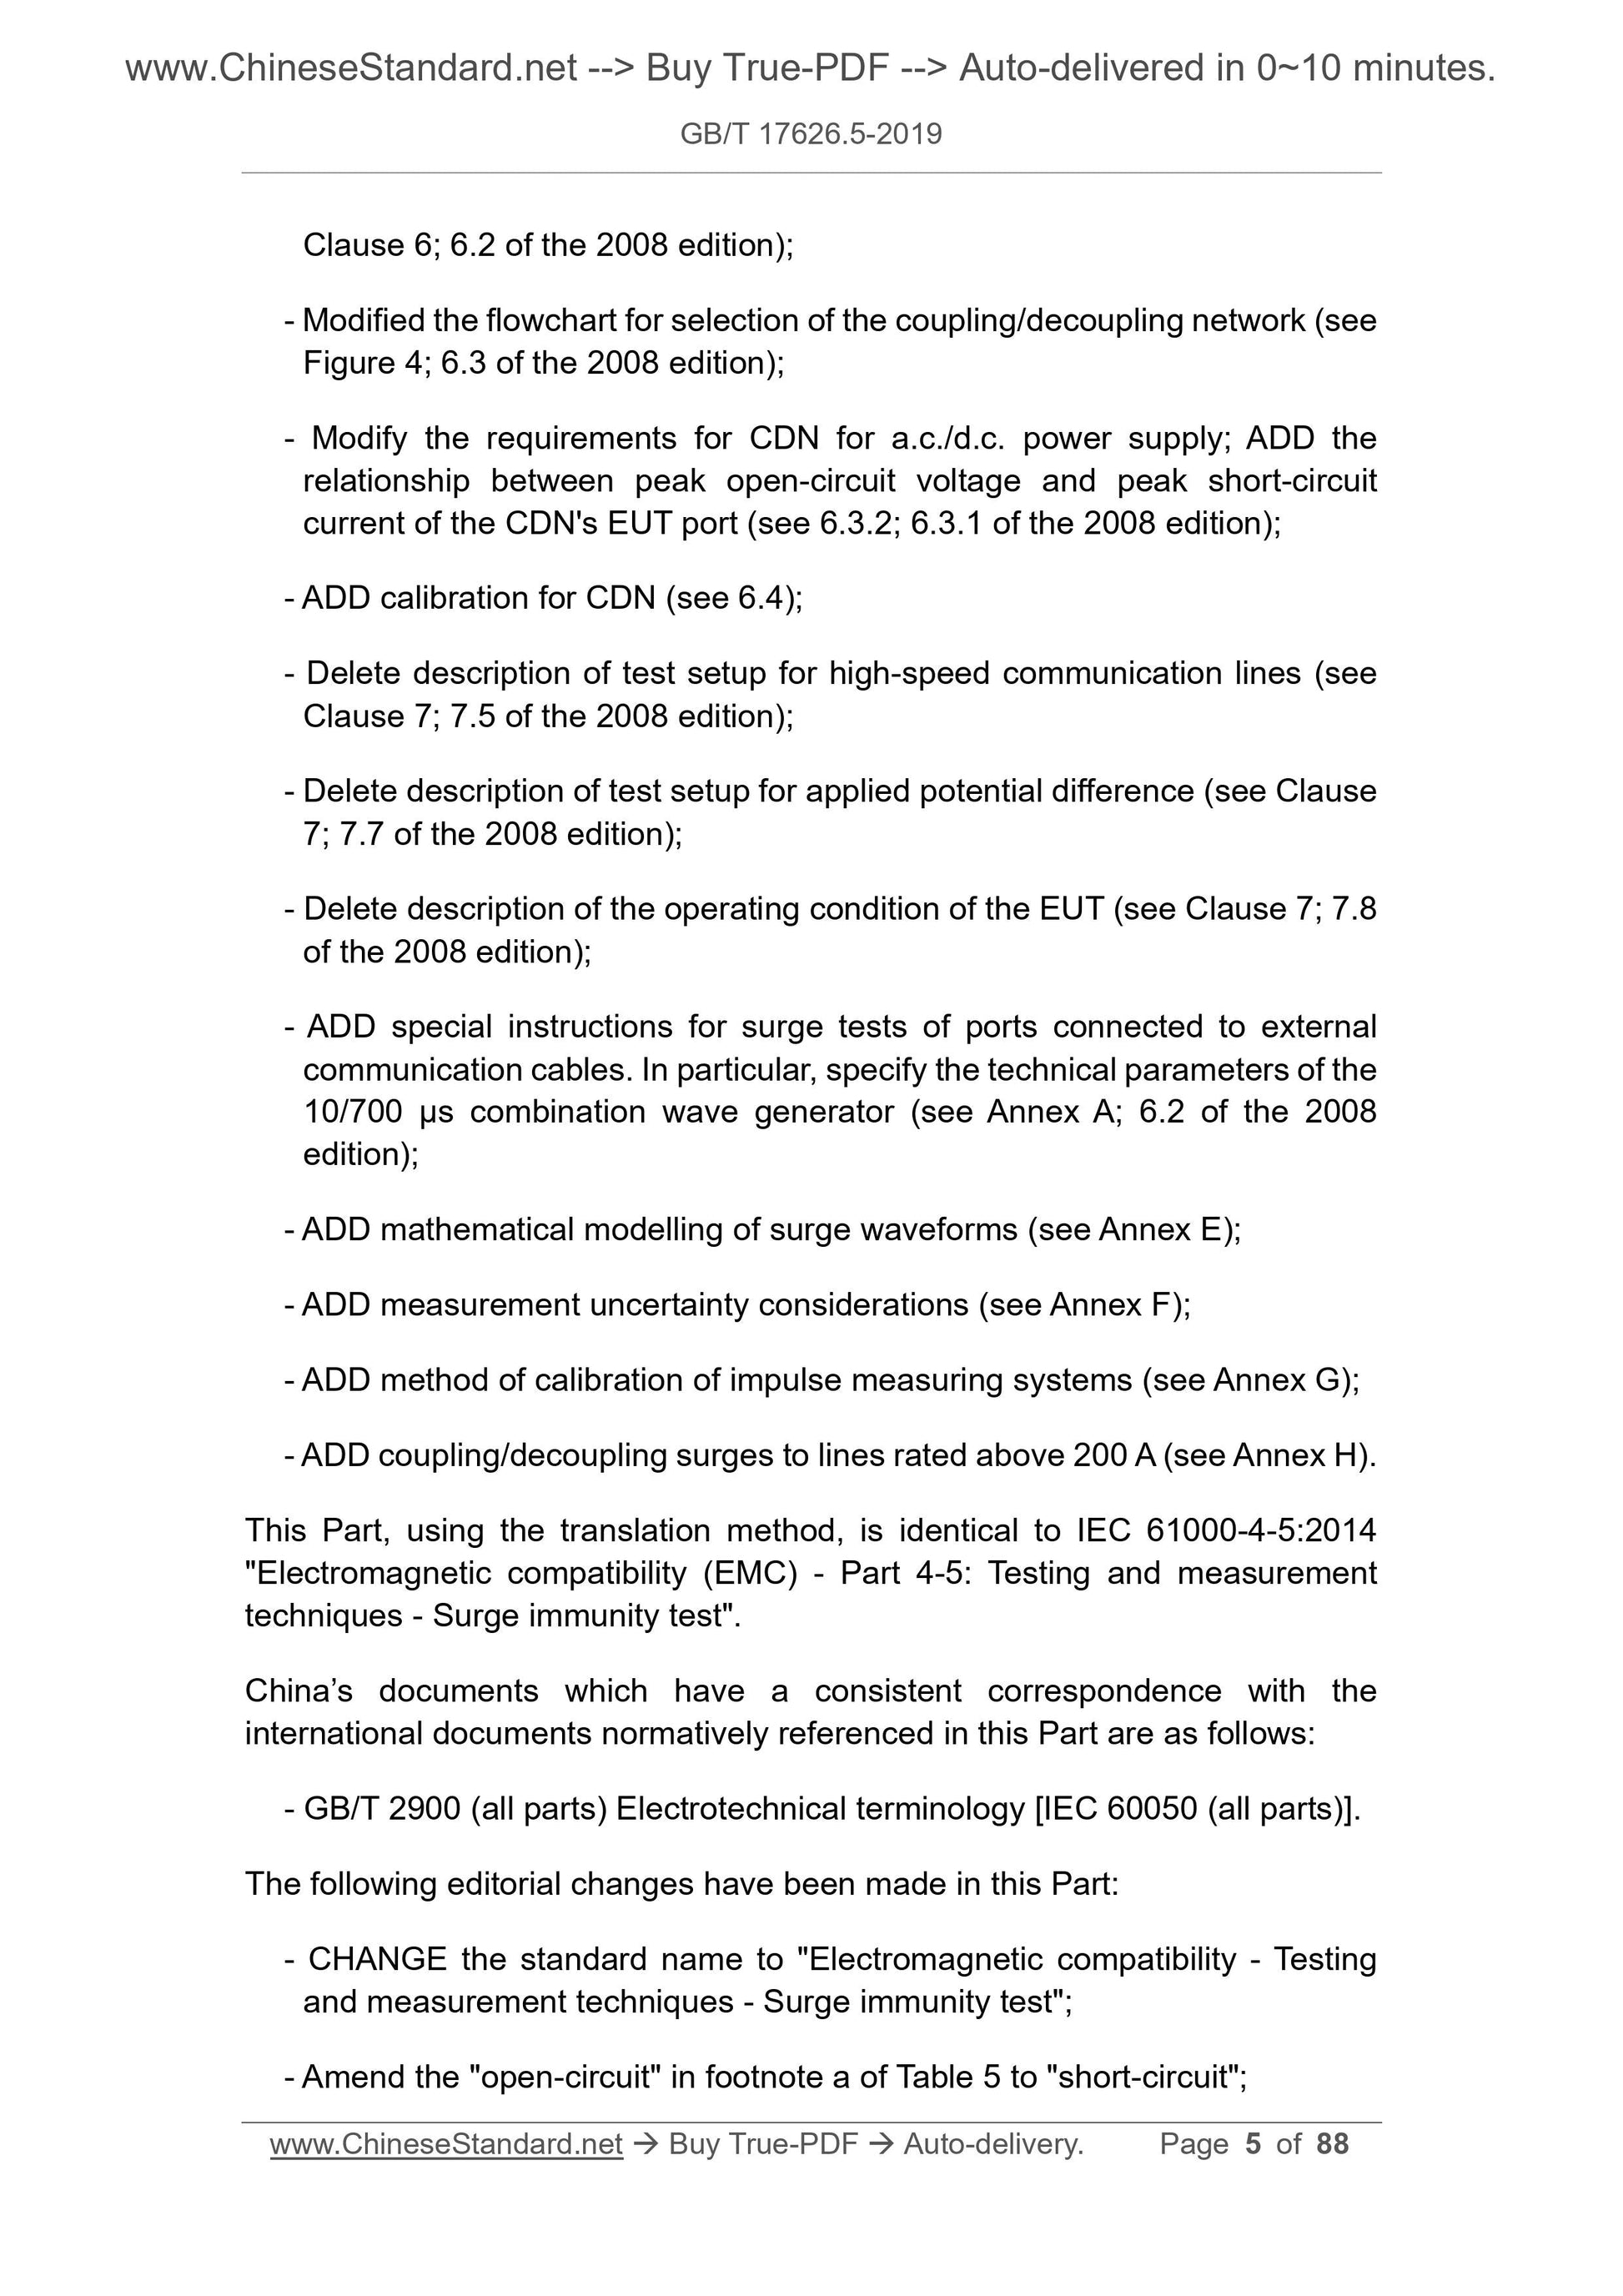 GB/T 17626.5-2019 Page 4